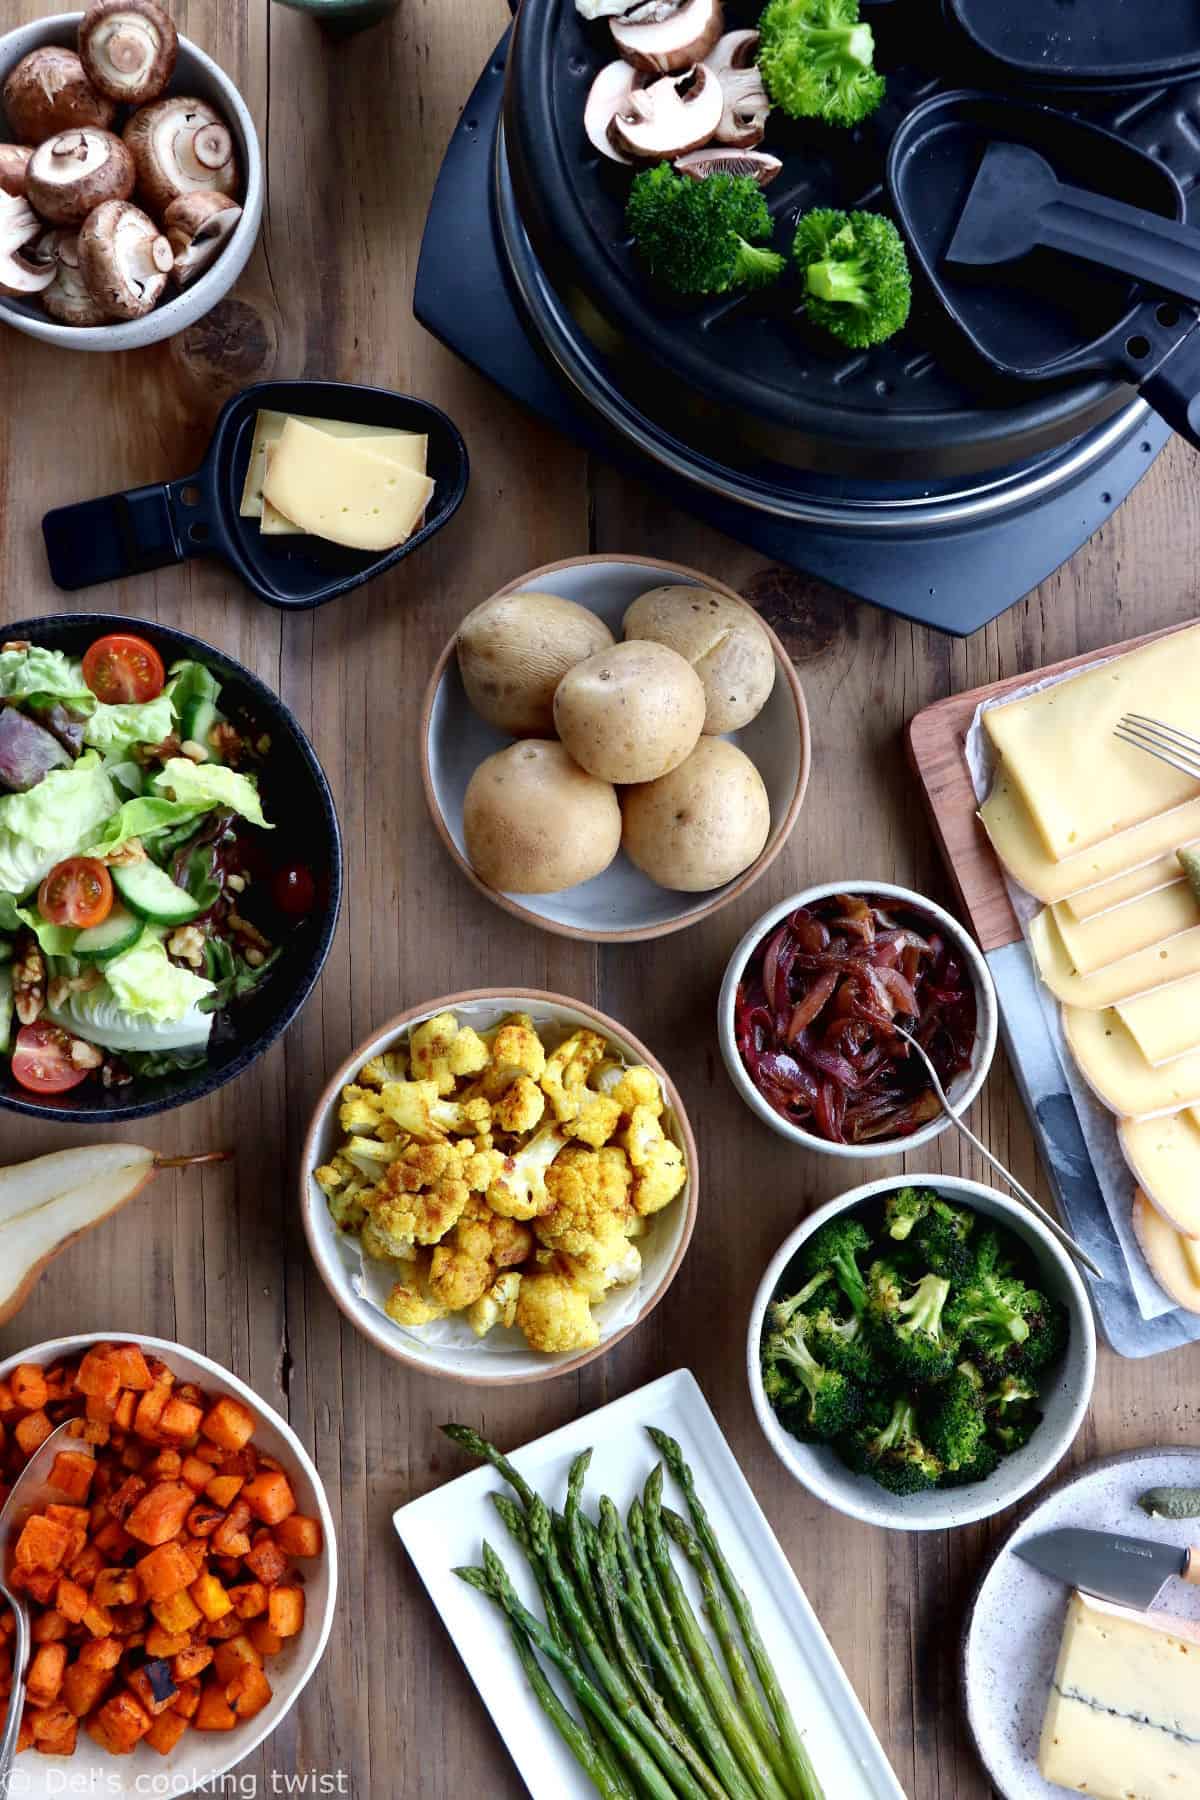 How To Host A Vegetarian Raclette Dinner Party - Del's cooking twist